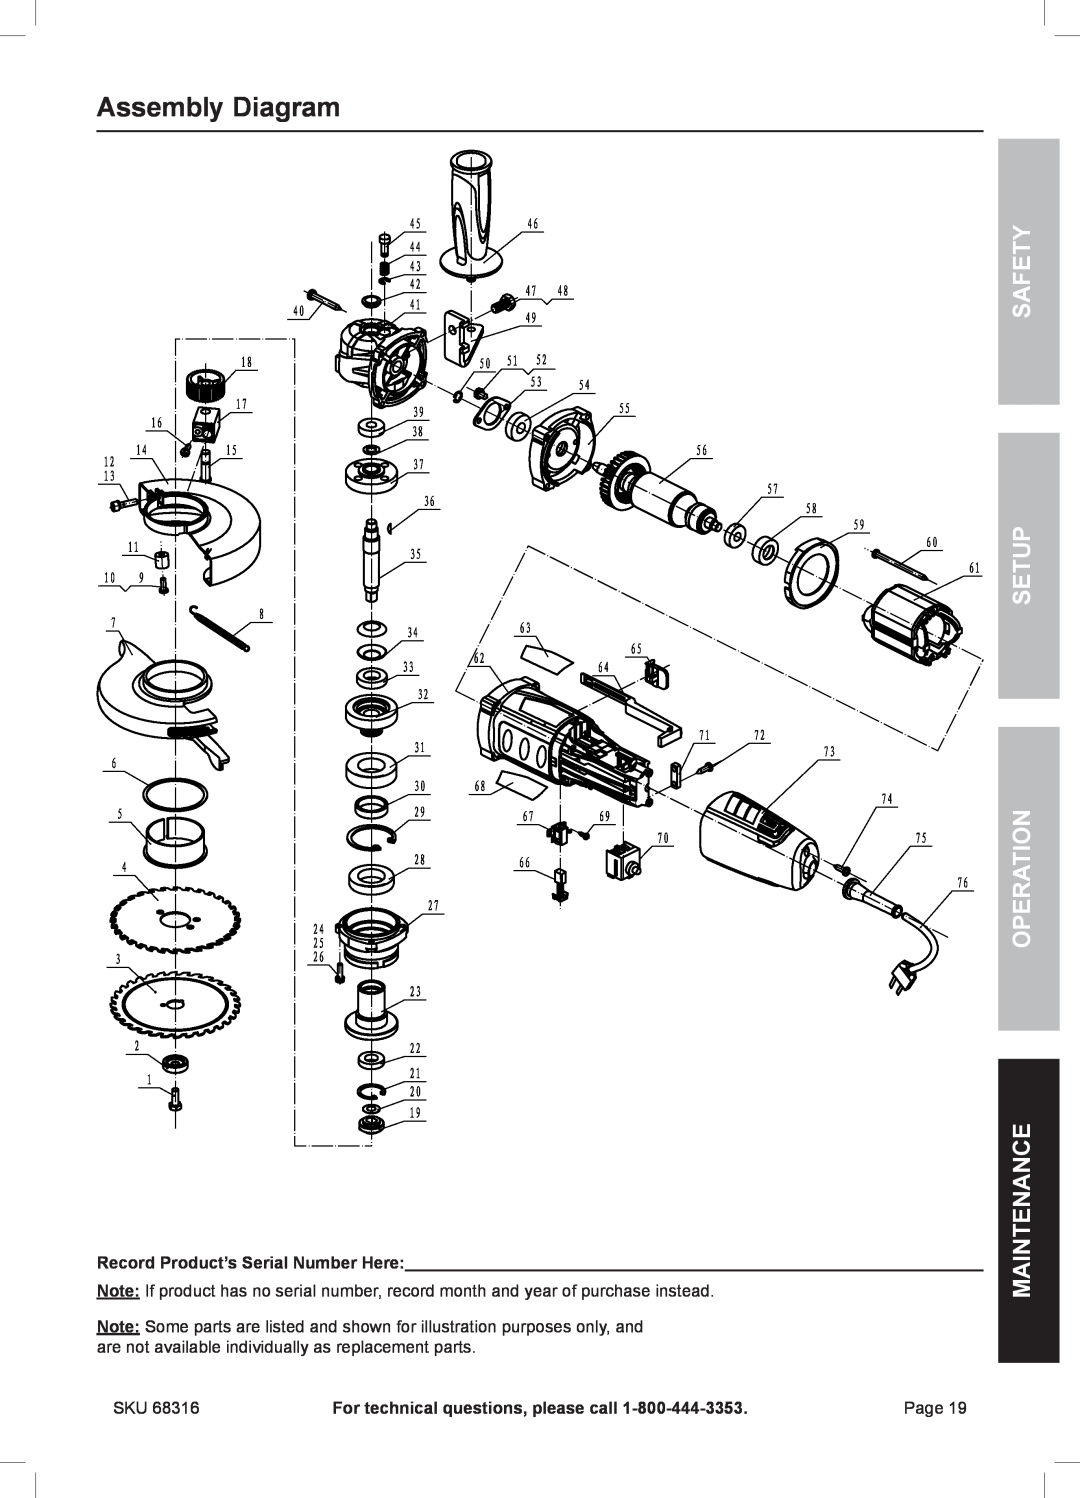 Chicago Electric 68316 owner manual Assembly Diagram, Safety Setup Operation Maintenance 